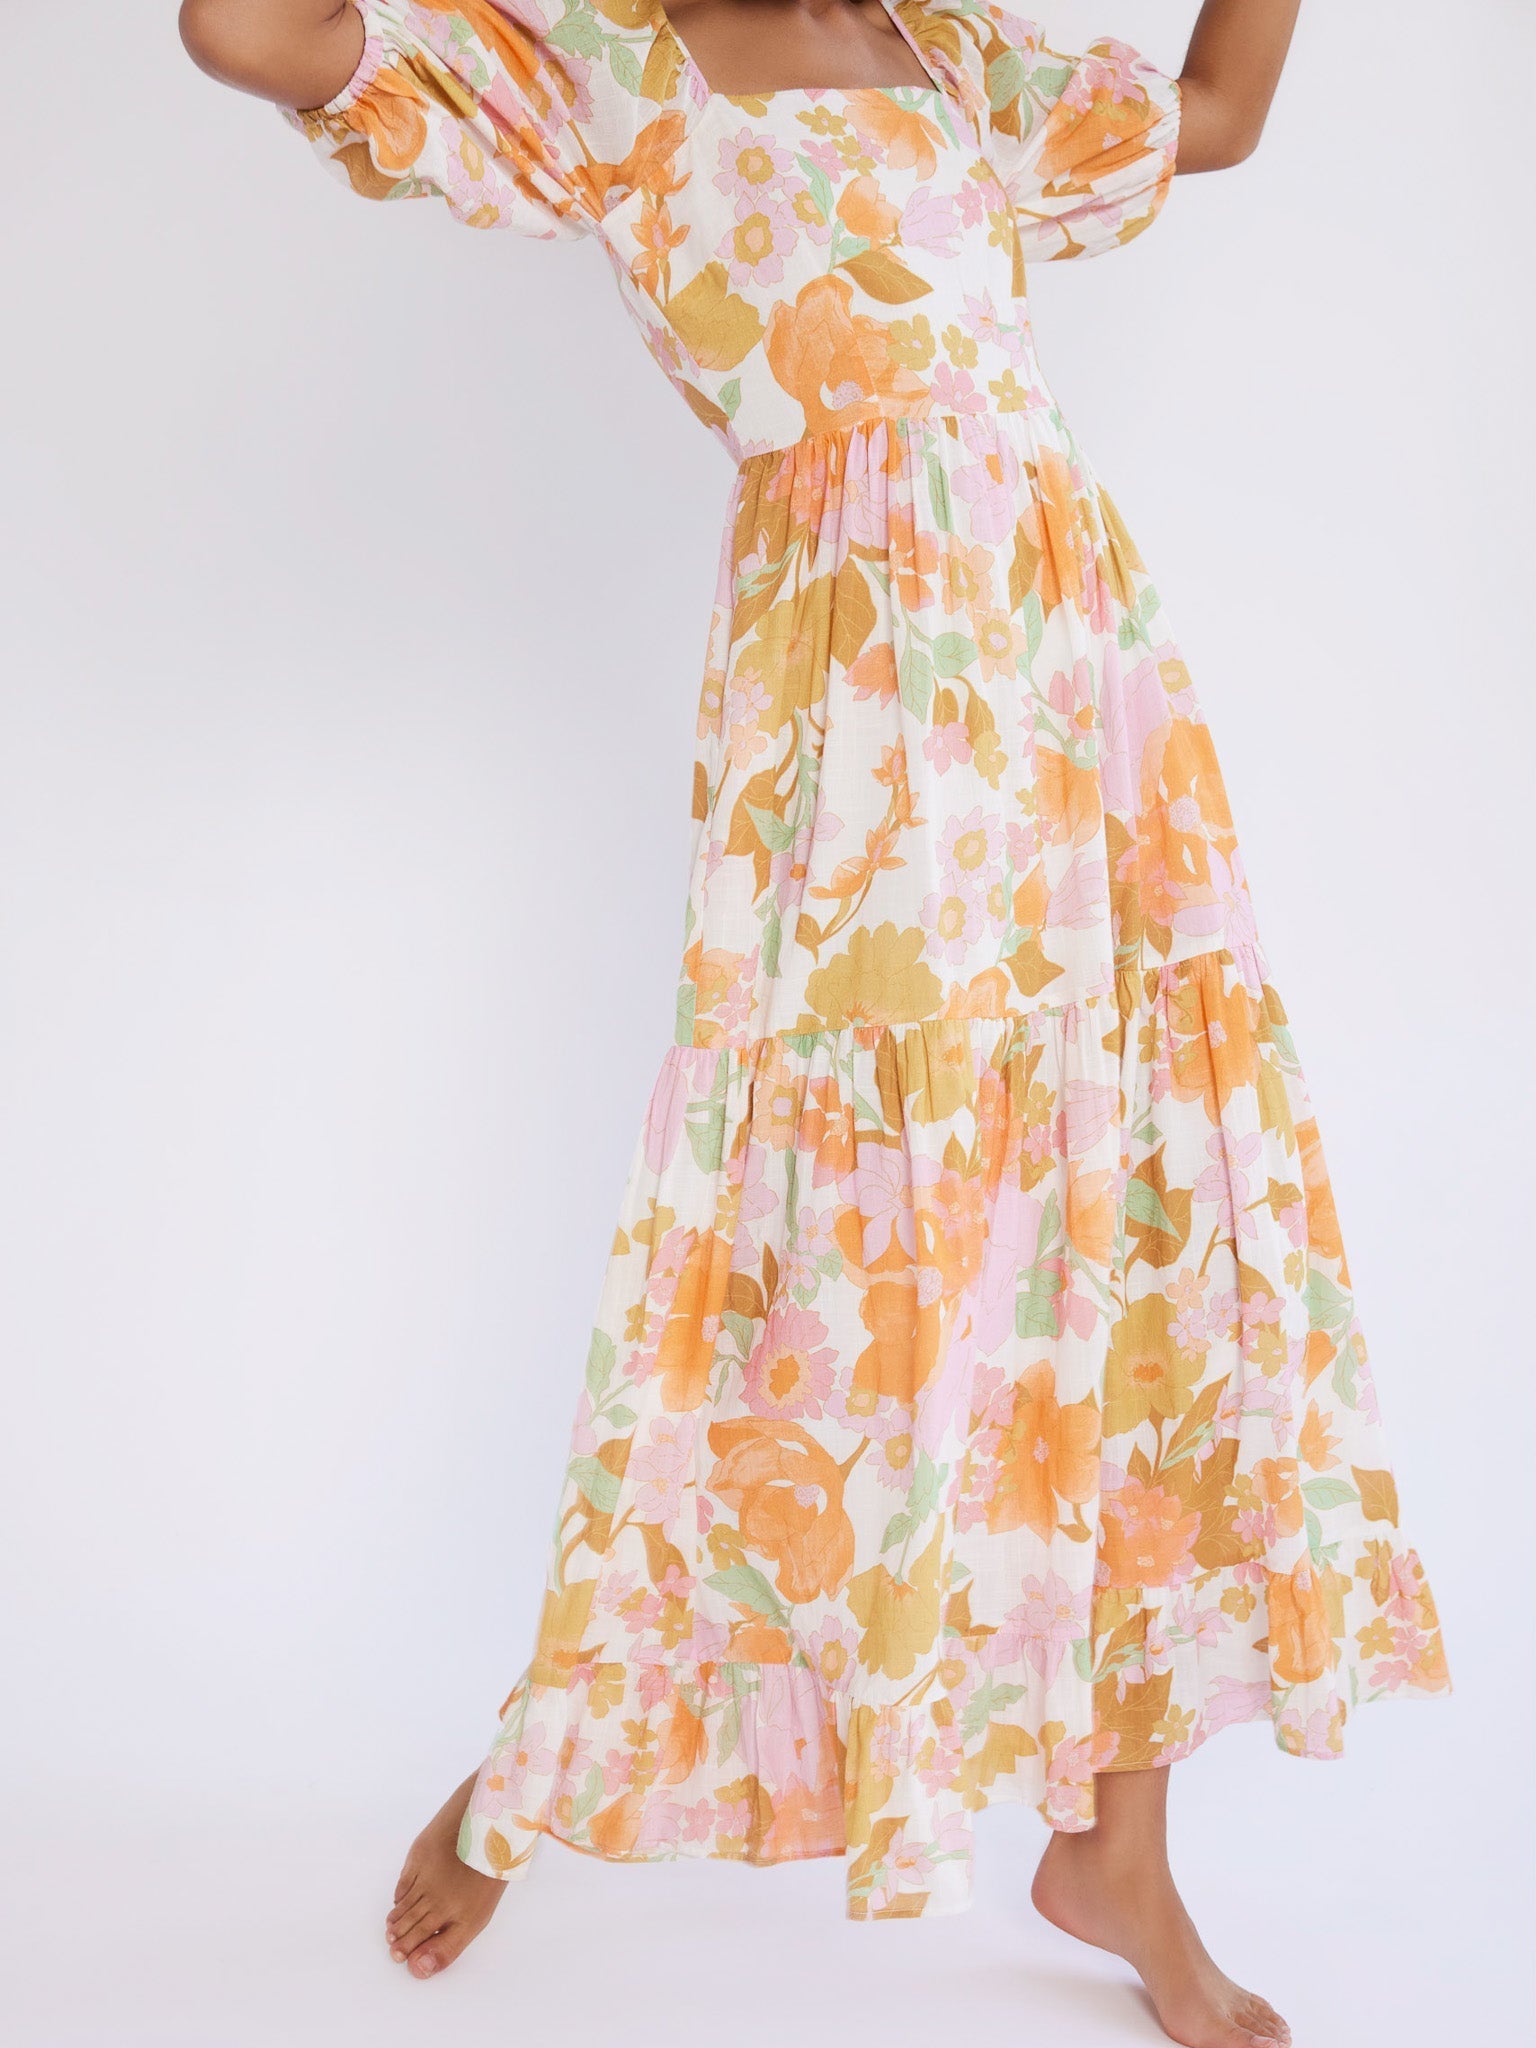 MILLE Clothing Manon Dress in Harmony Floral